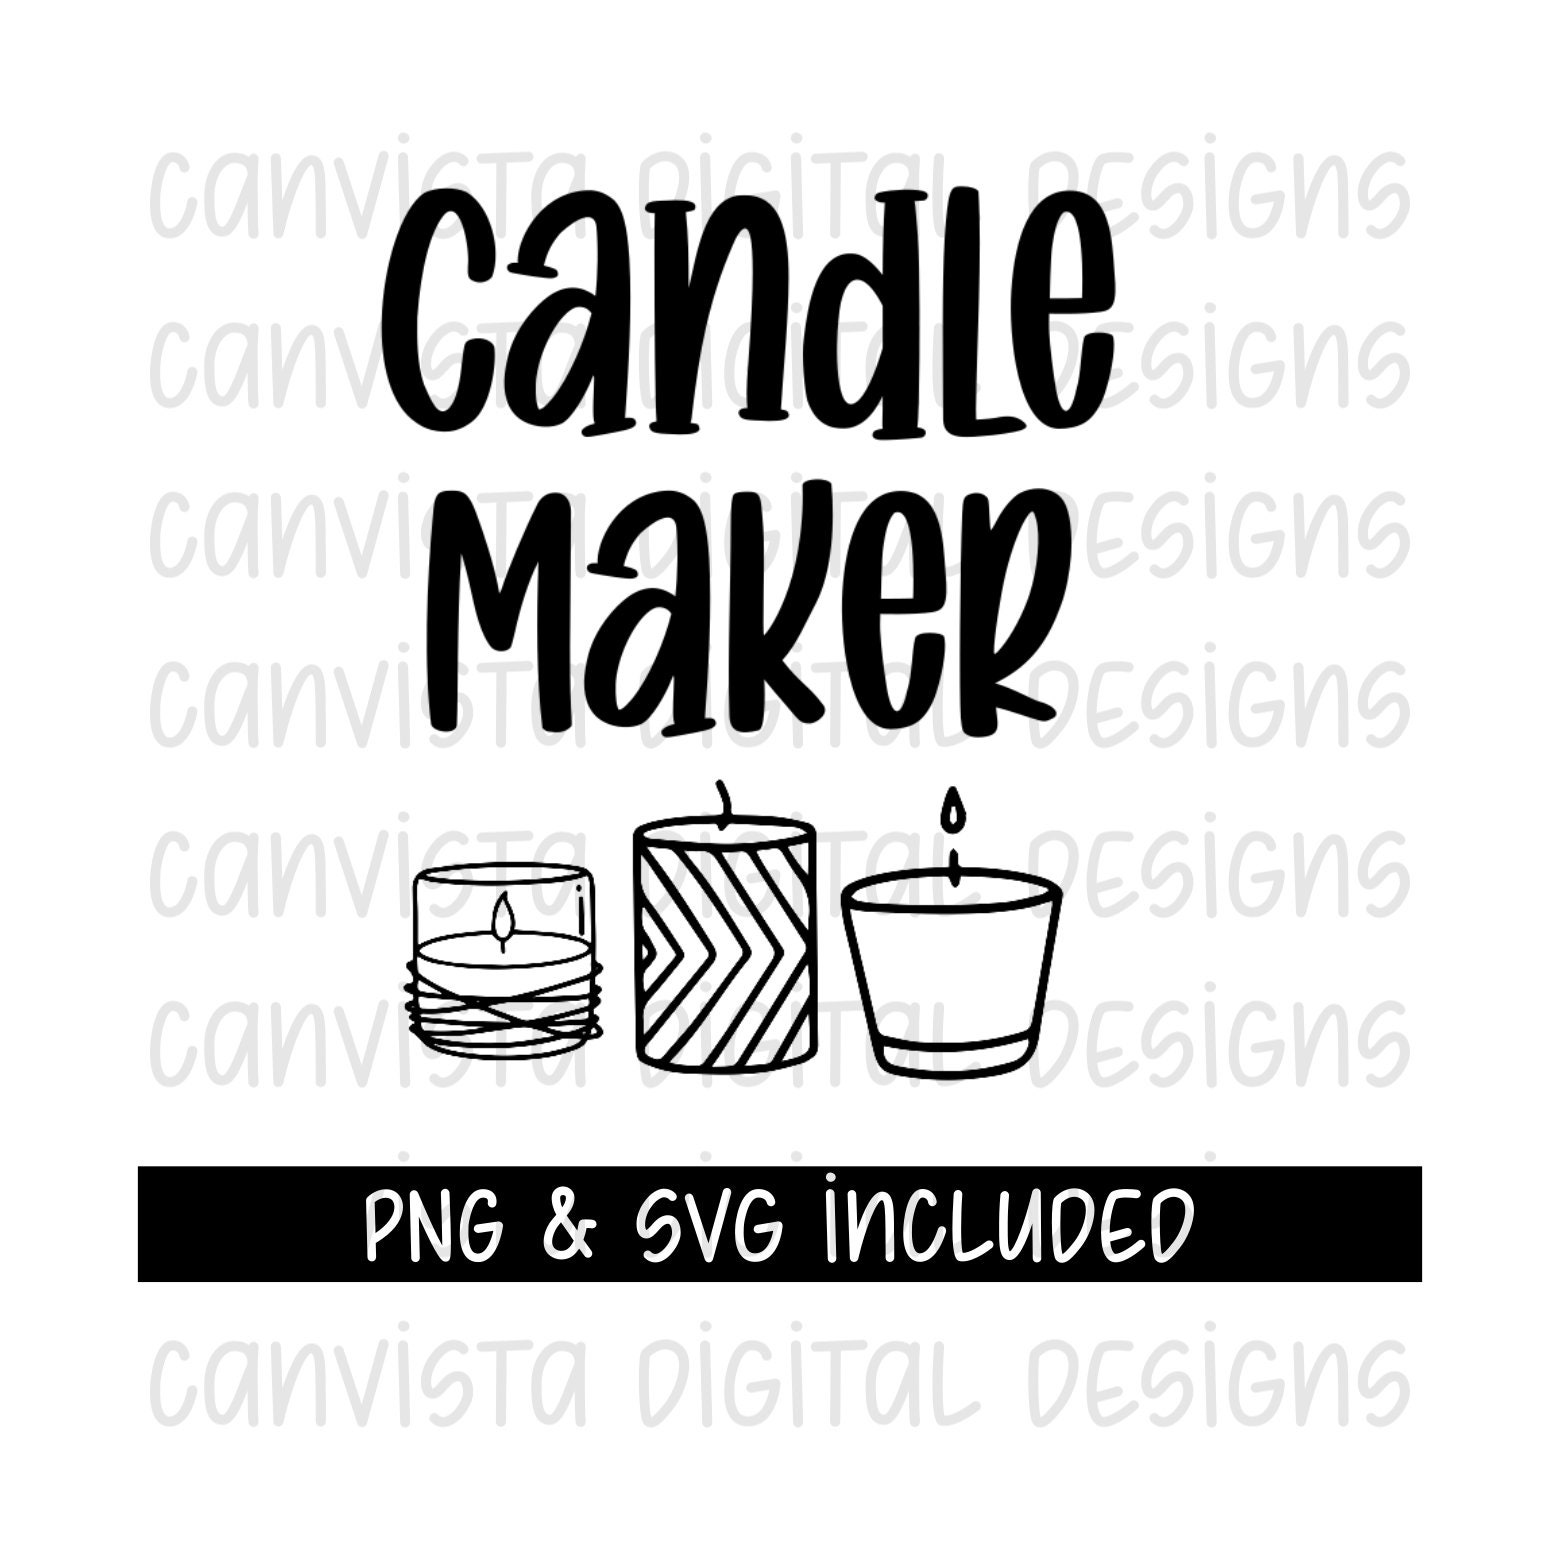 Wildflower Seeded Candle Dust Cover, Candle Dust Covers Template, Warning  Canva Template, Editable Candle Dust Cover, Candle Maker Template 